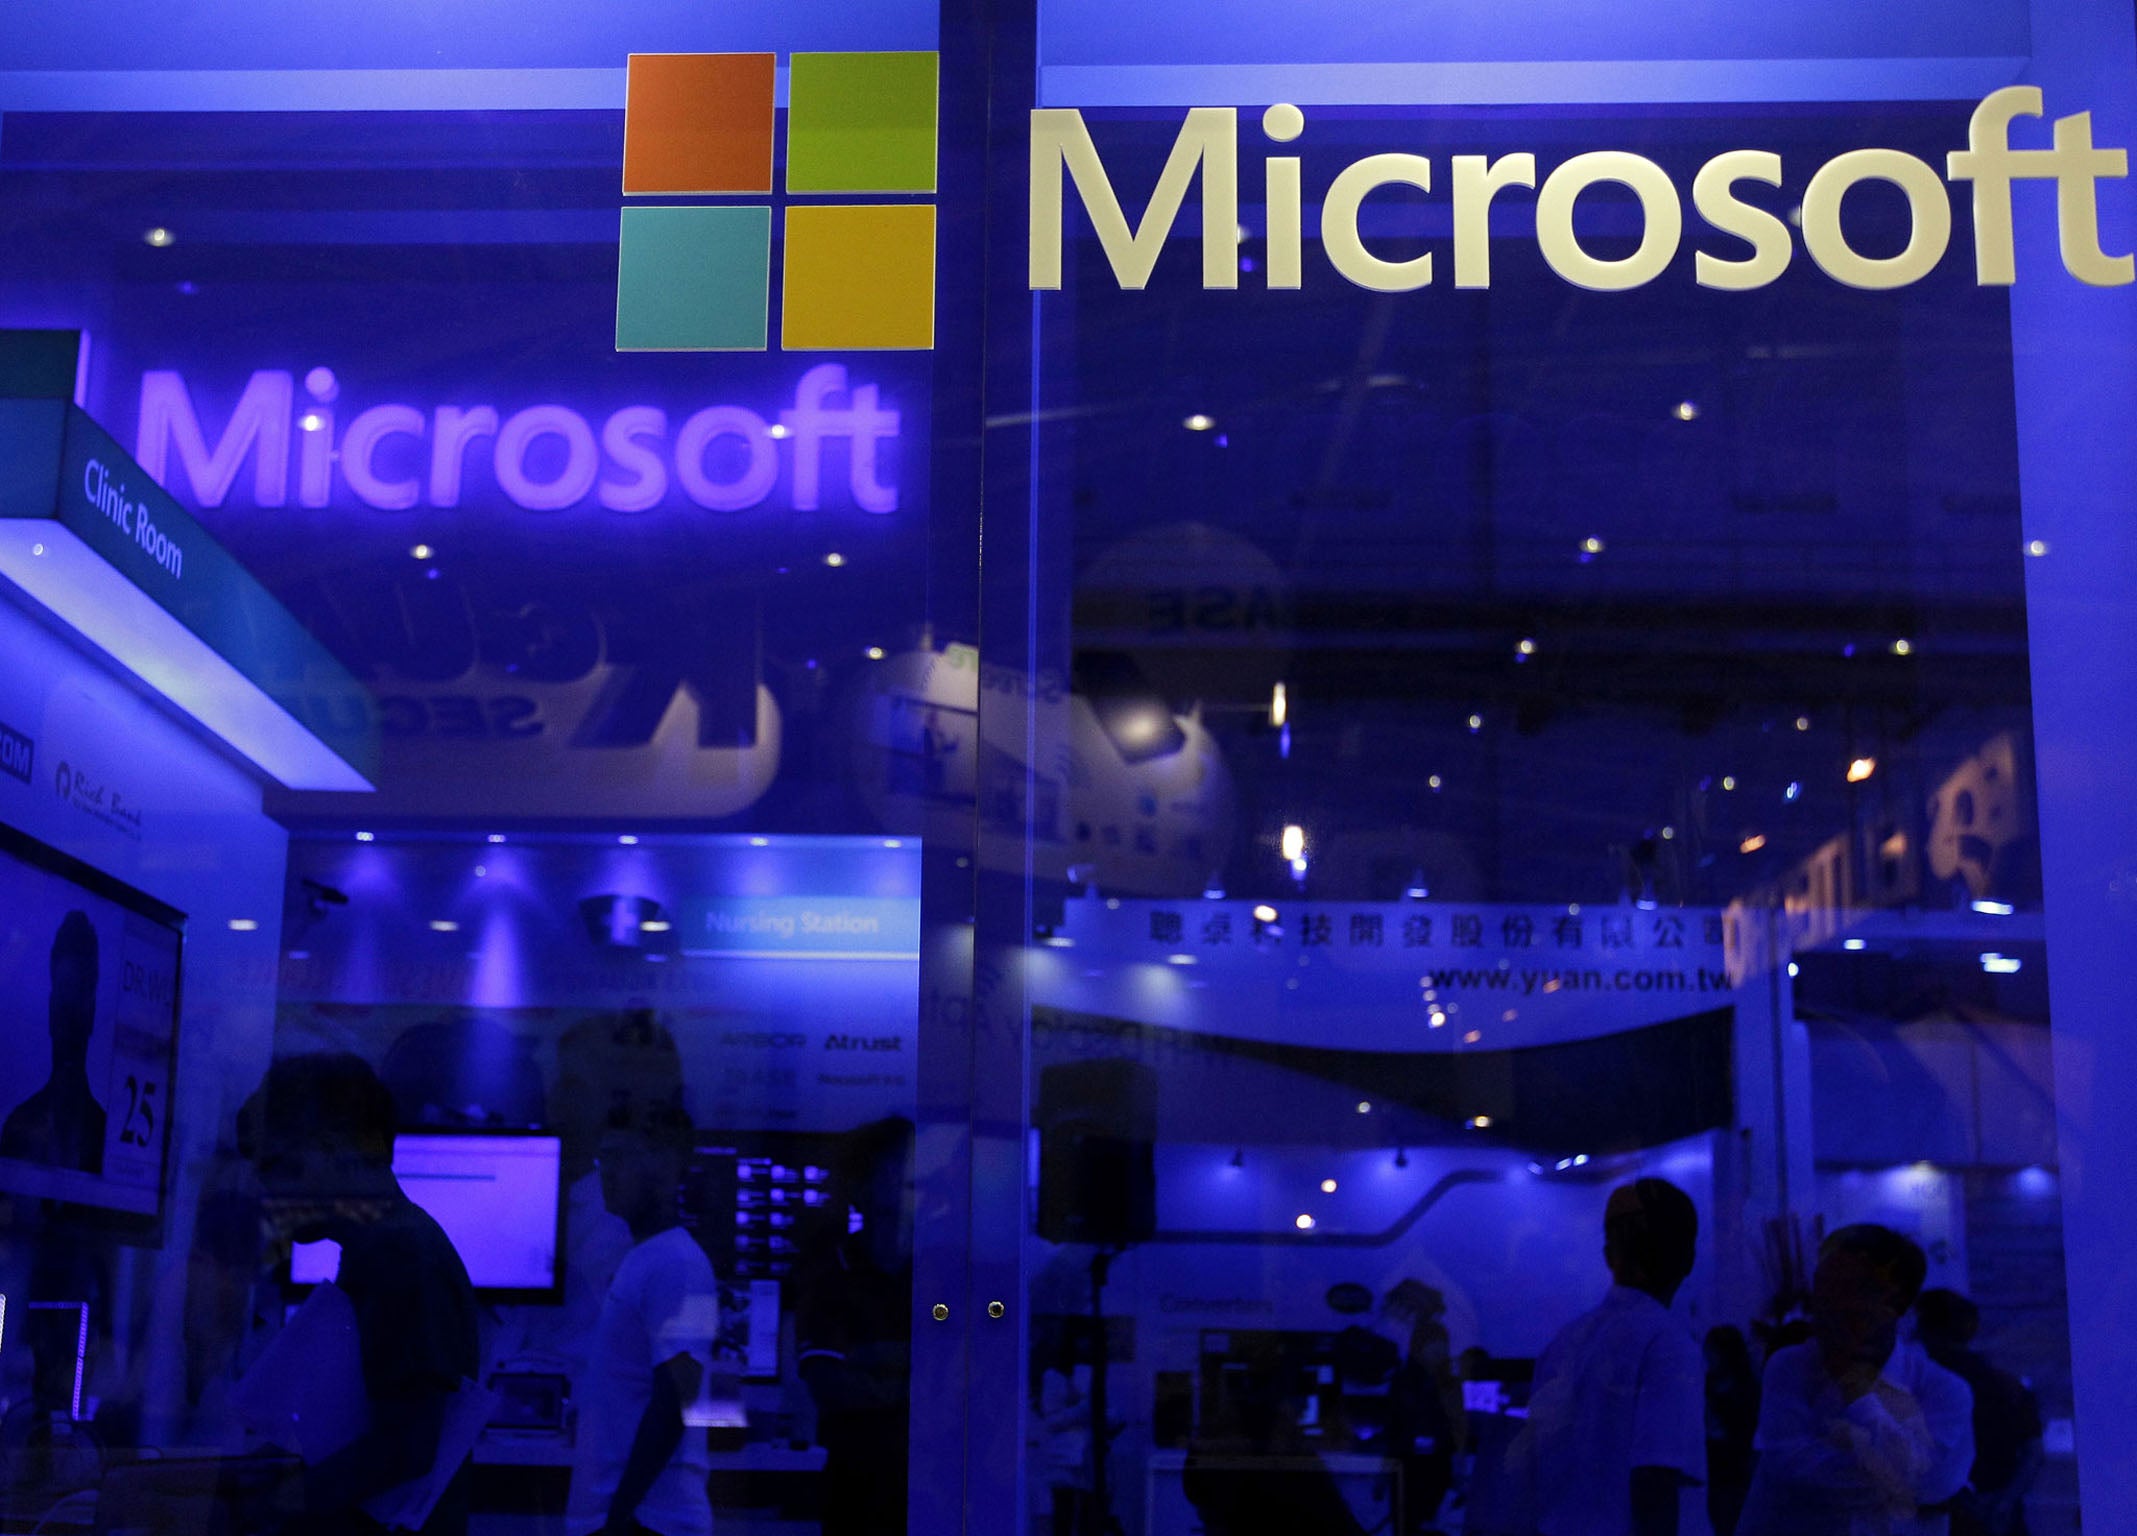 Microsoft teamed with the FBI in their "most aggressive botnet operation to date"